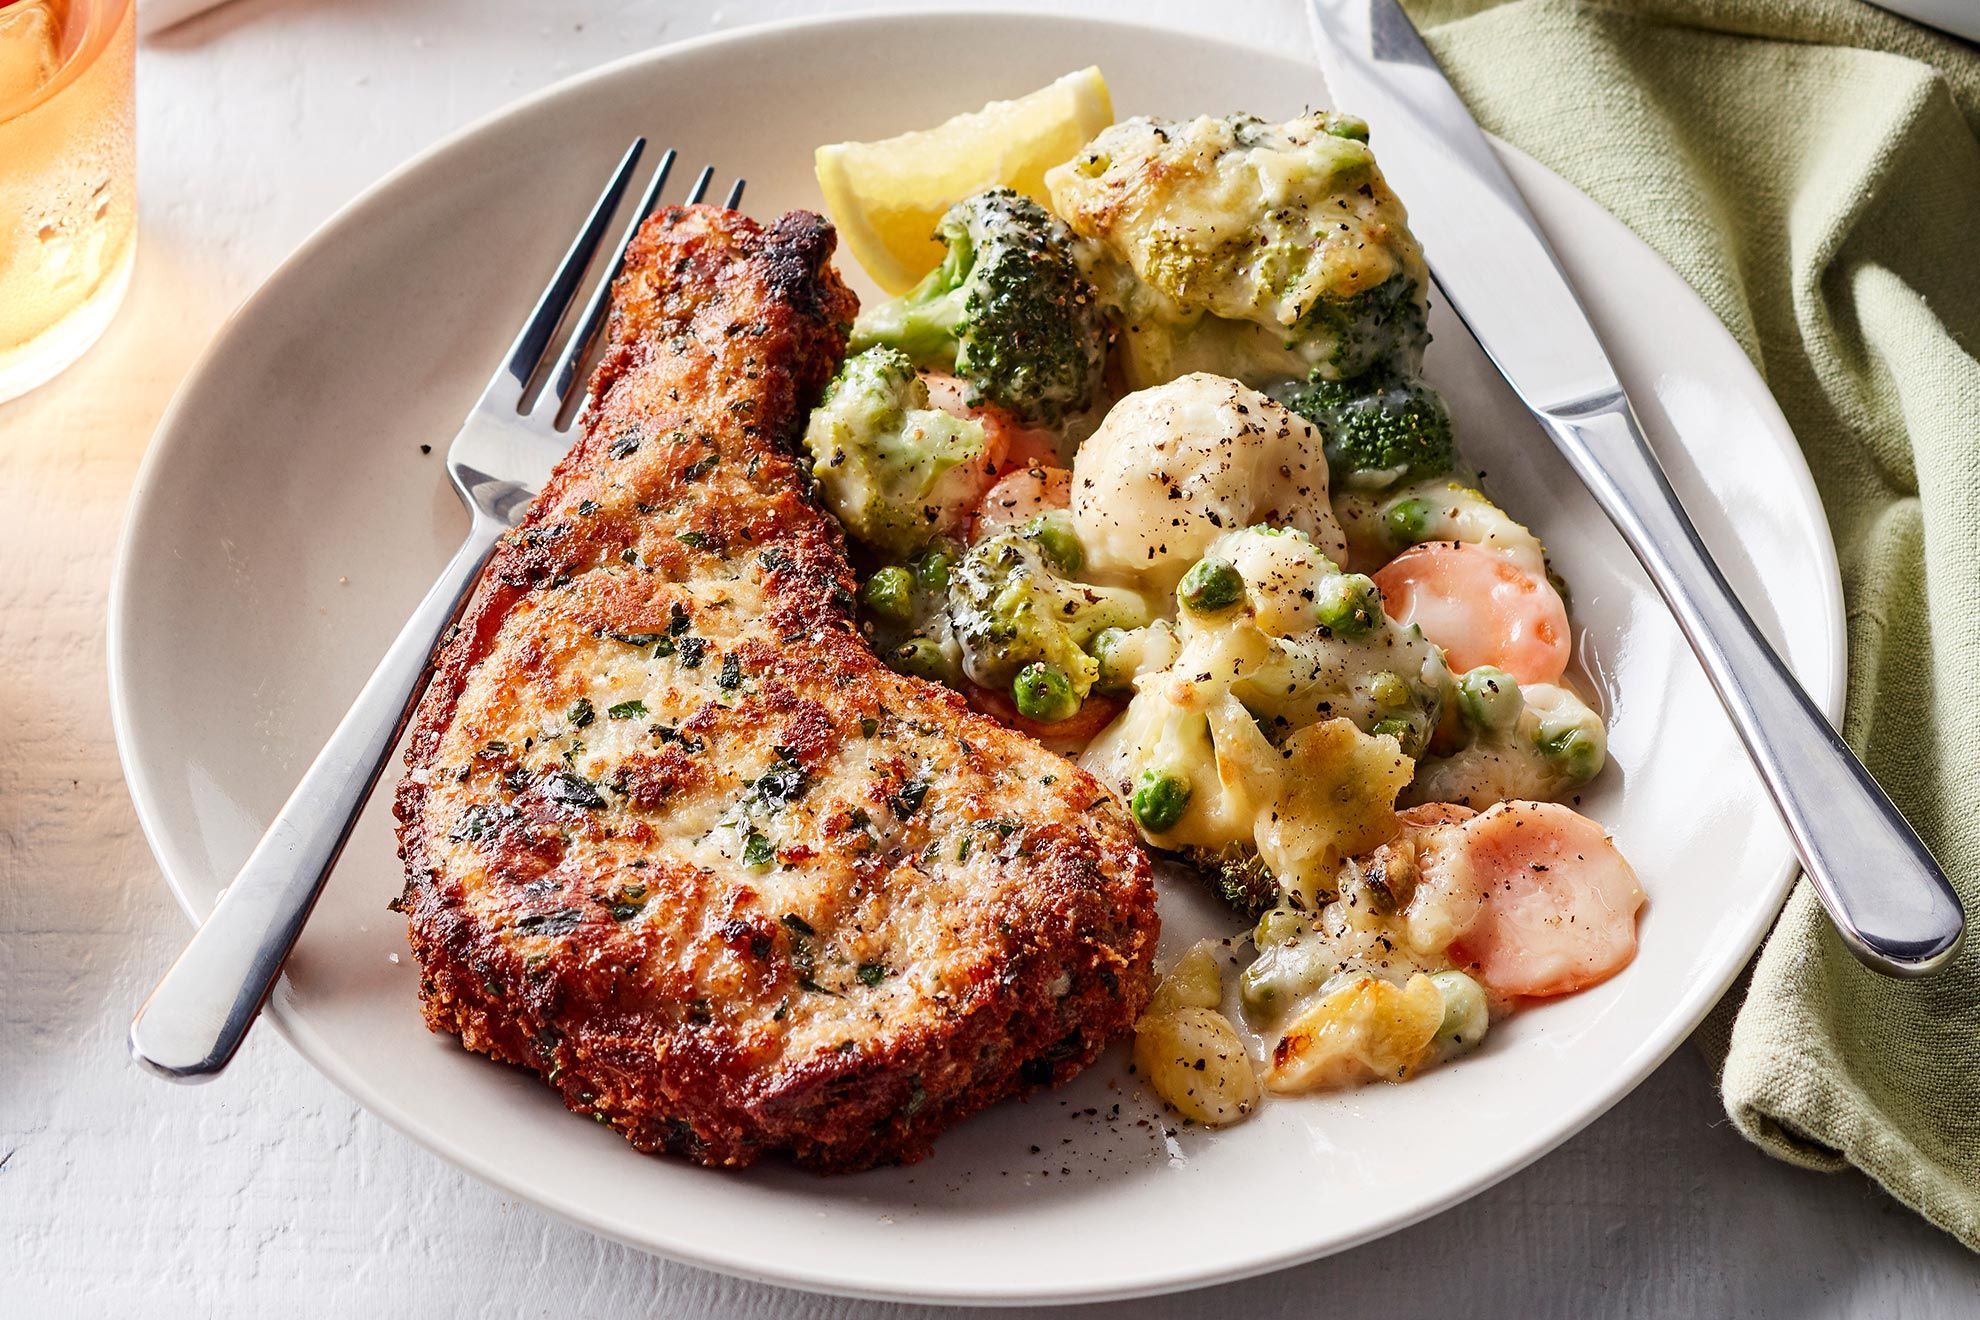 What Vegetables Go With Pork Chops